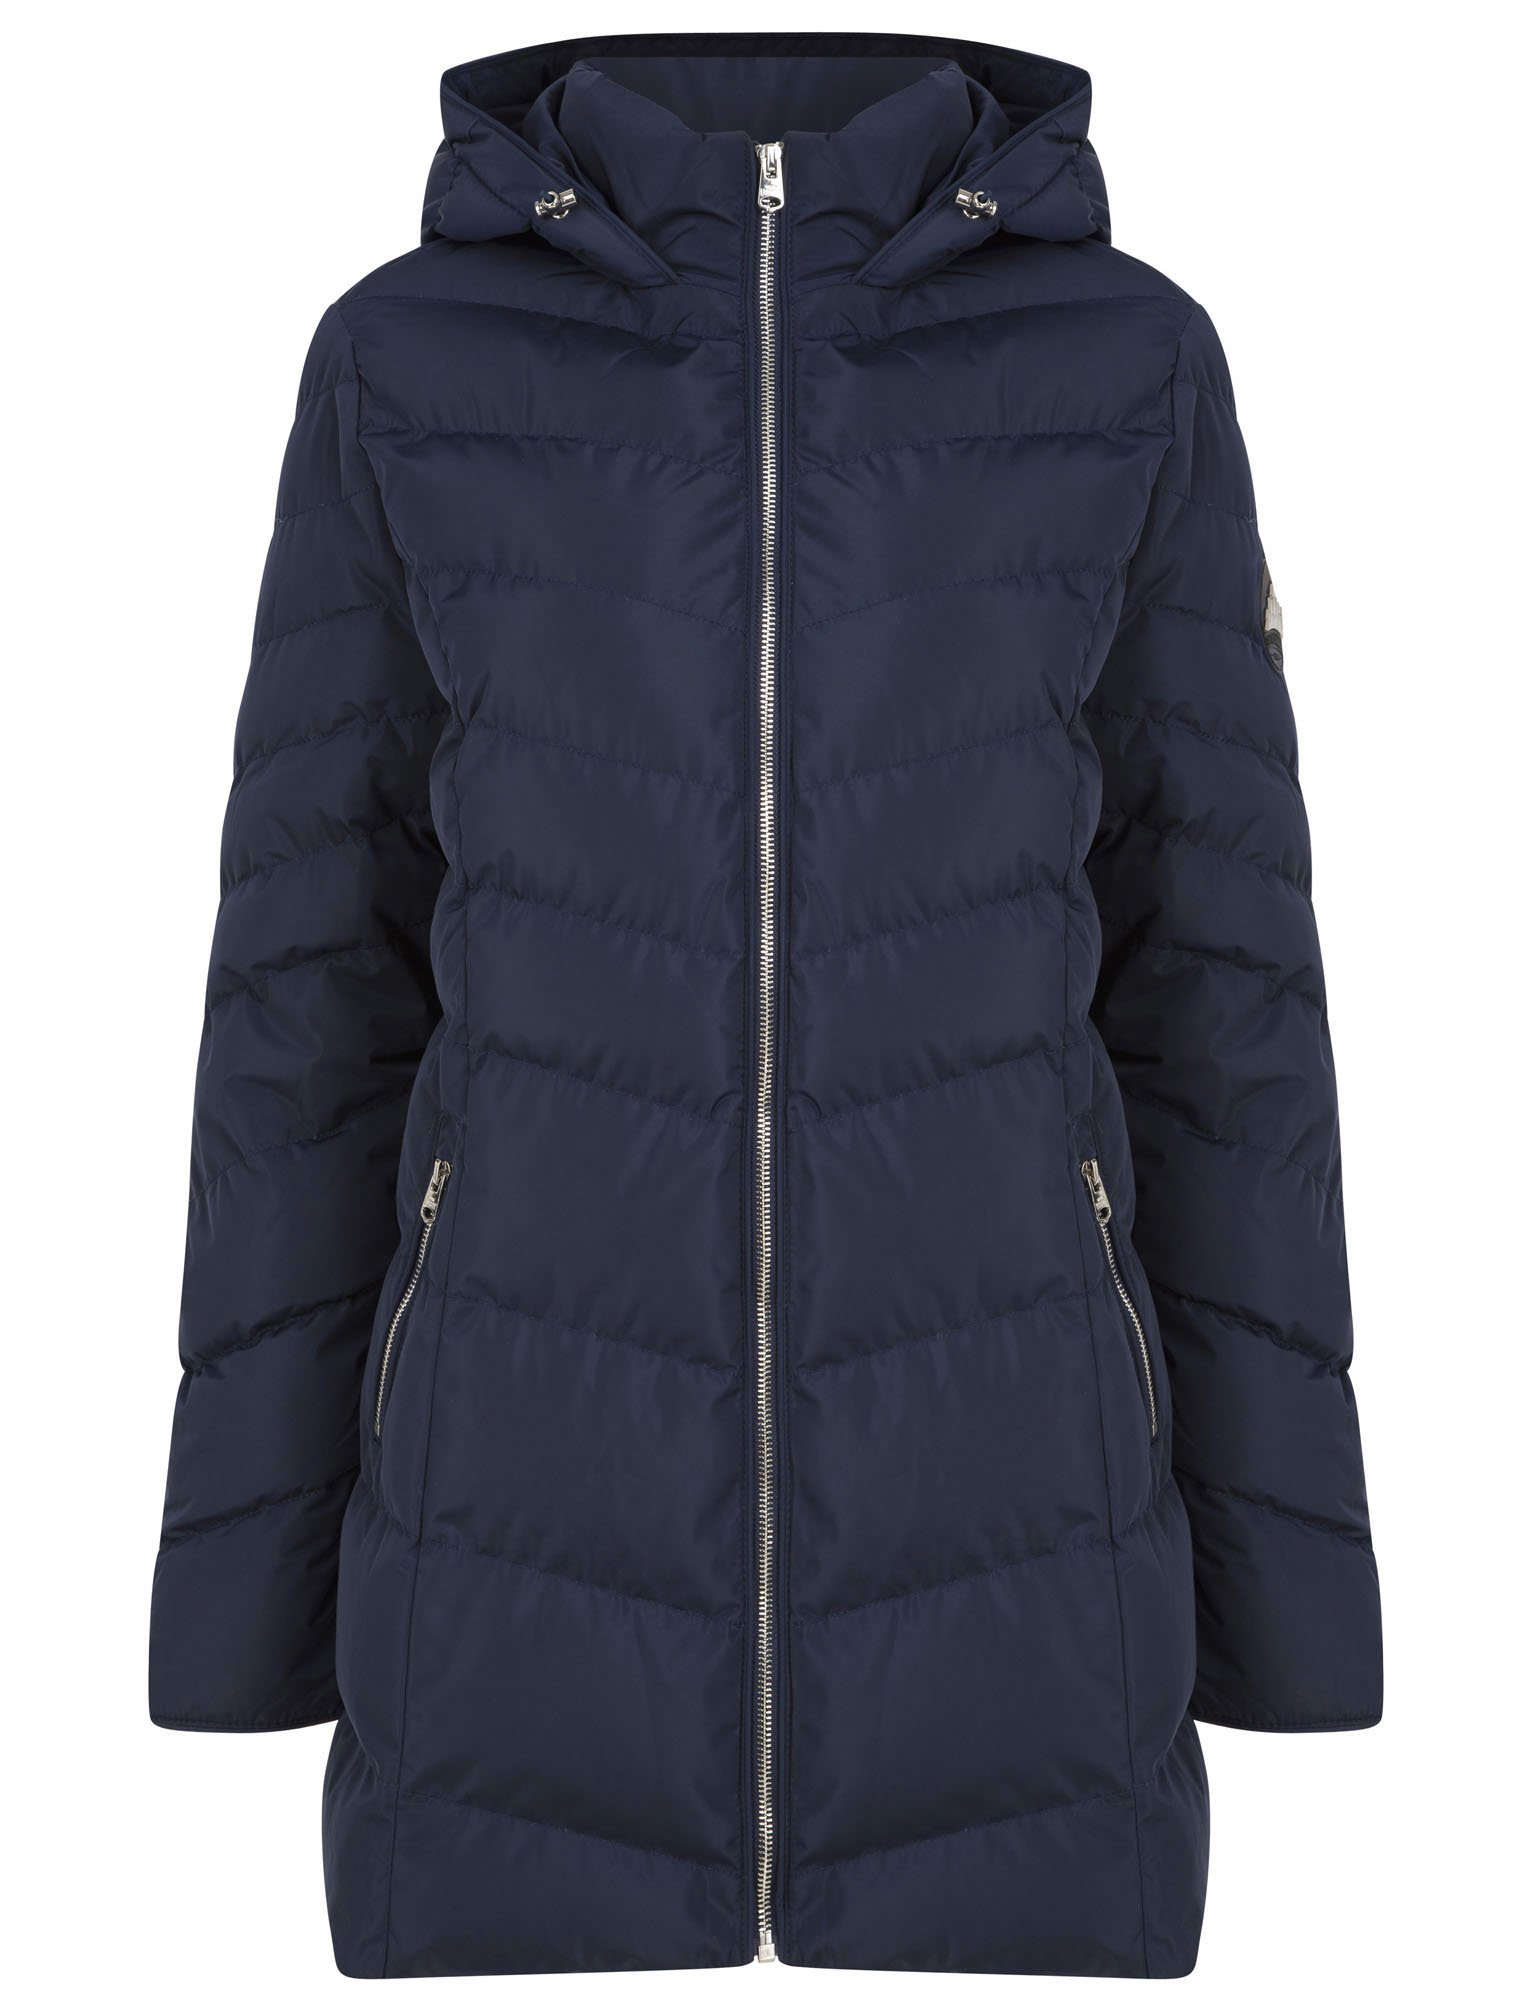 Tokyo Laundry Women's Puffer Jacket Longline Quilted Padded Hooded Coat ...